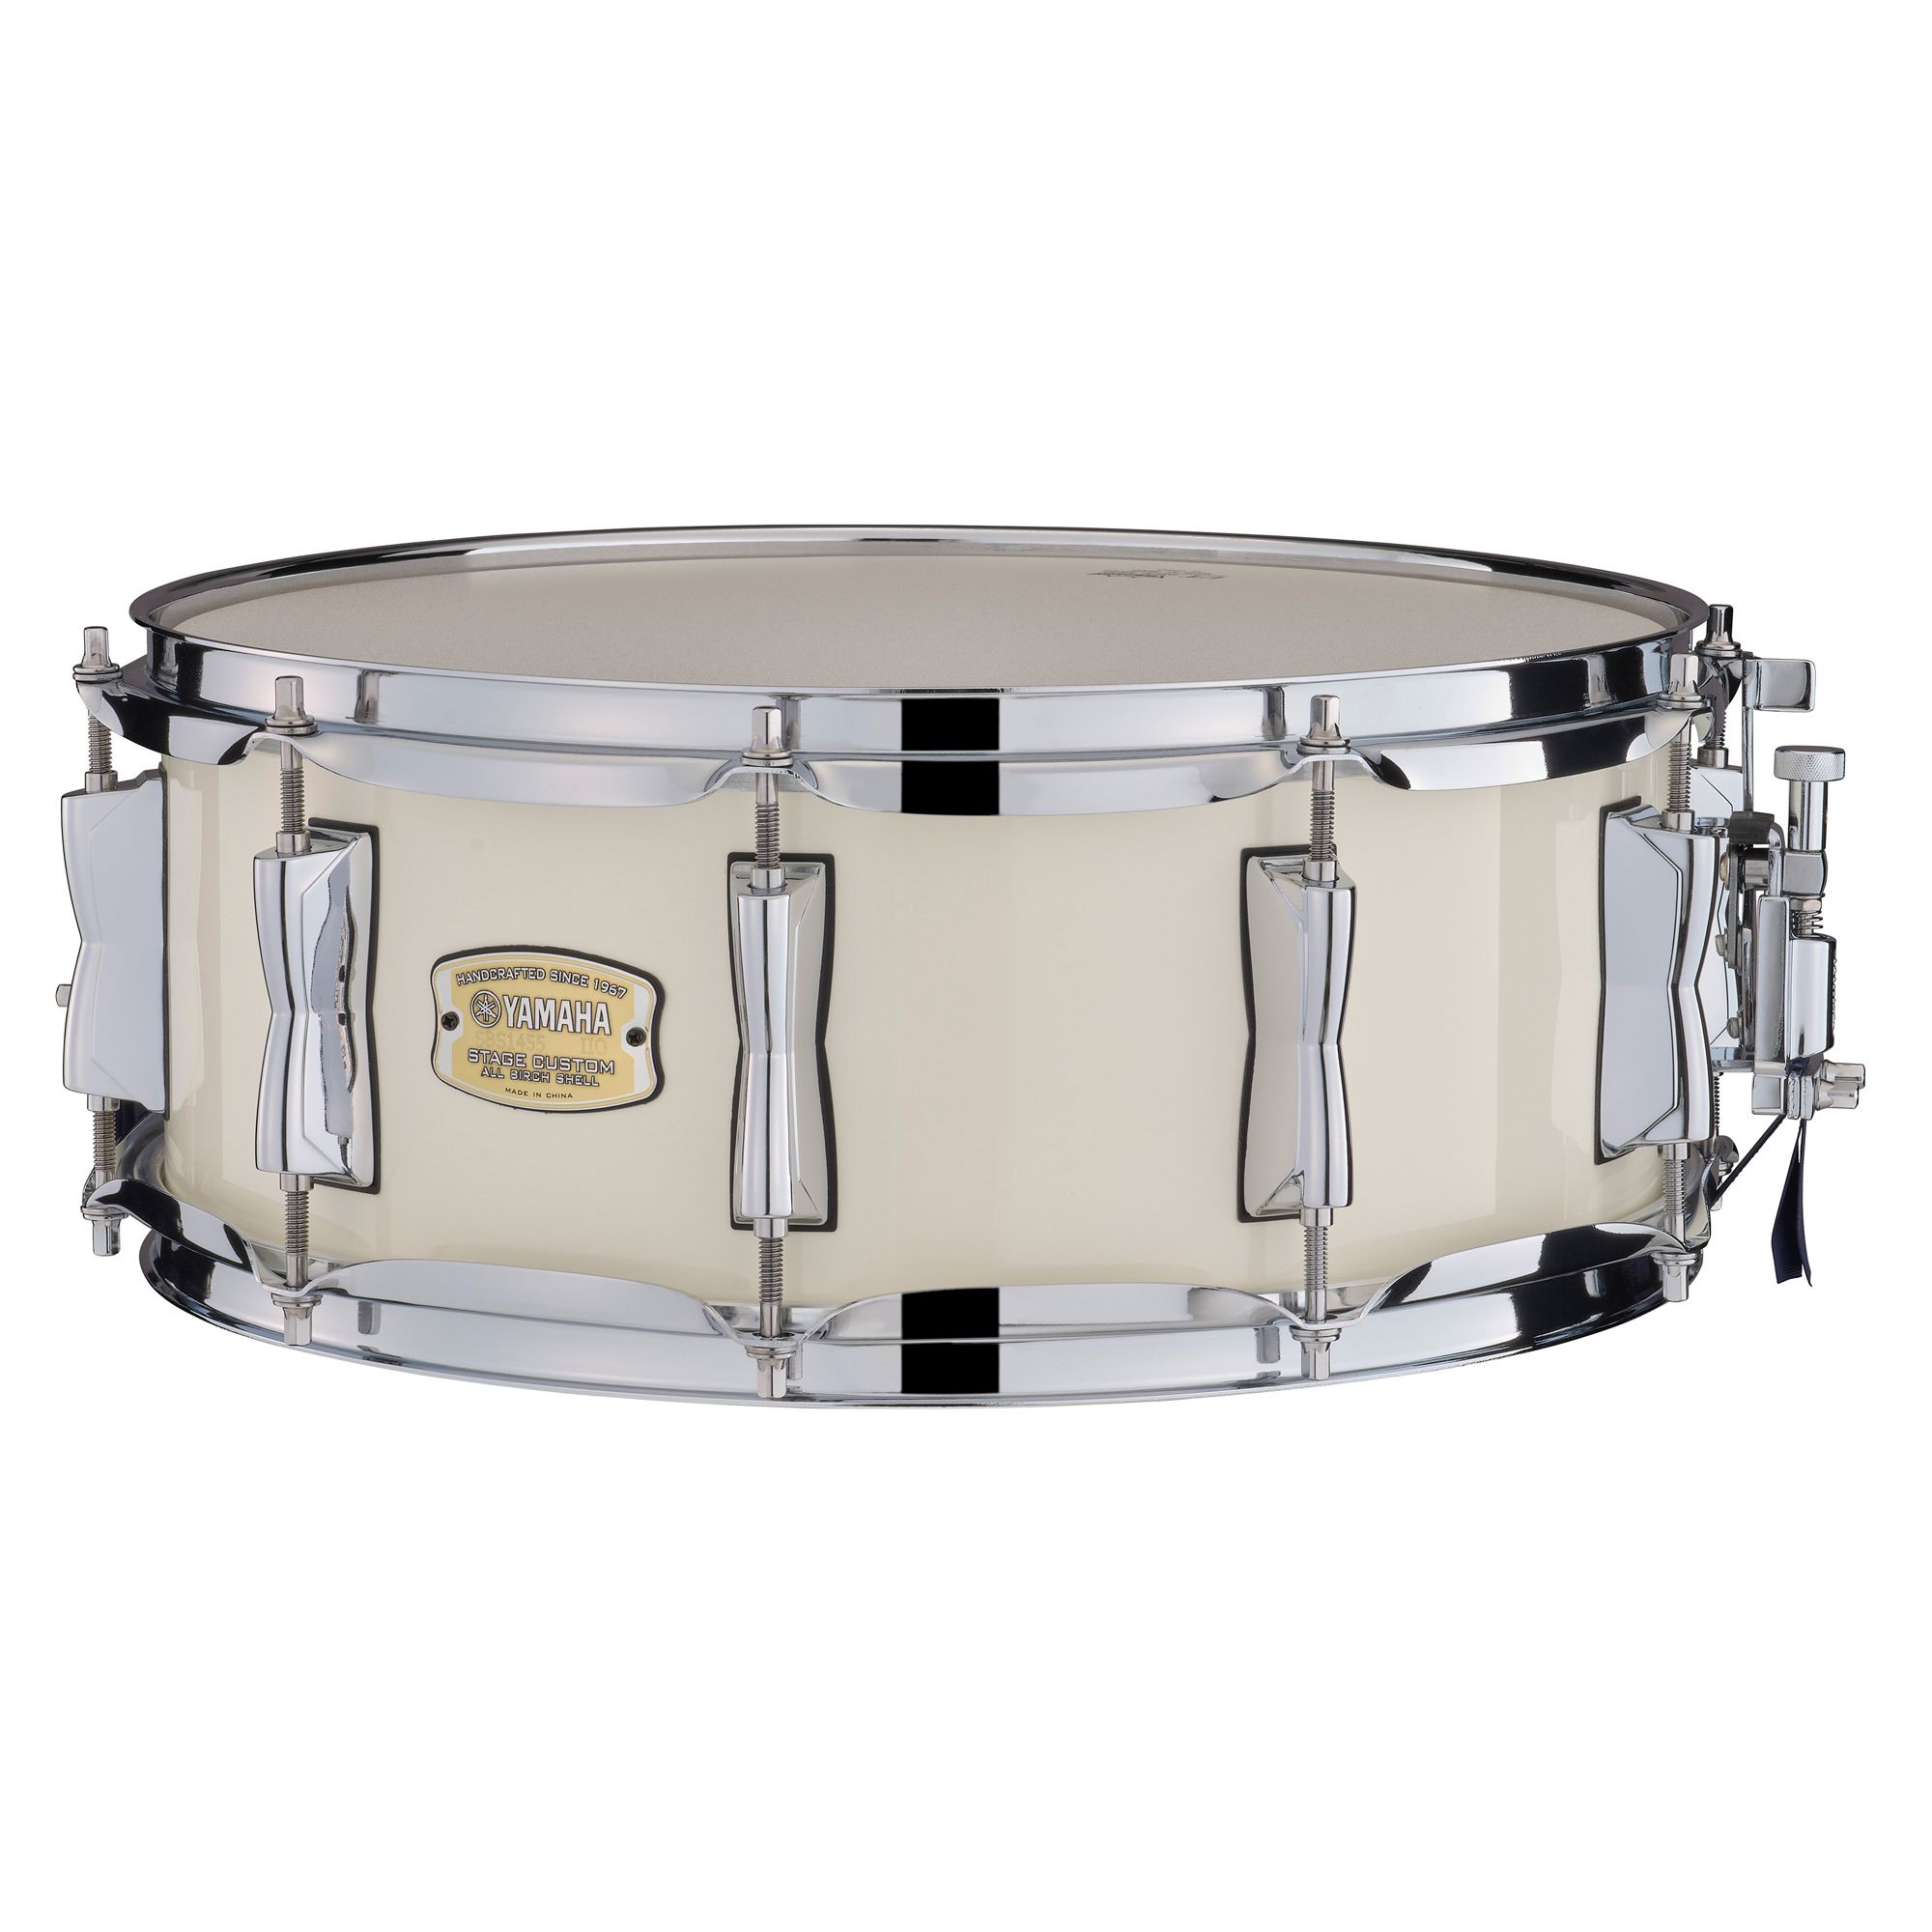 Stage Custom Birch - Overview - Snare Drums - Acoustic Drums 